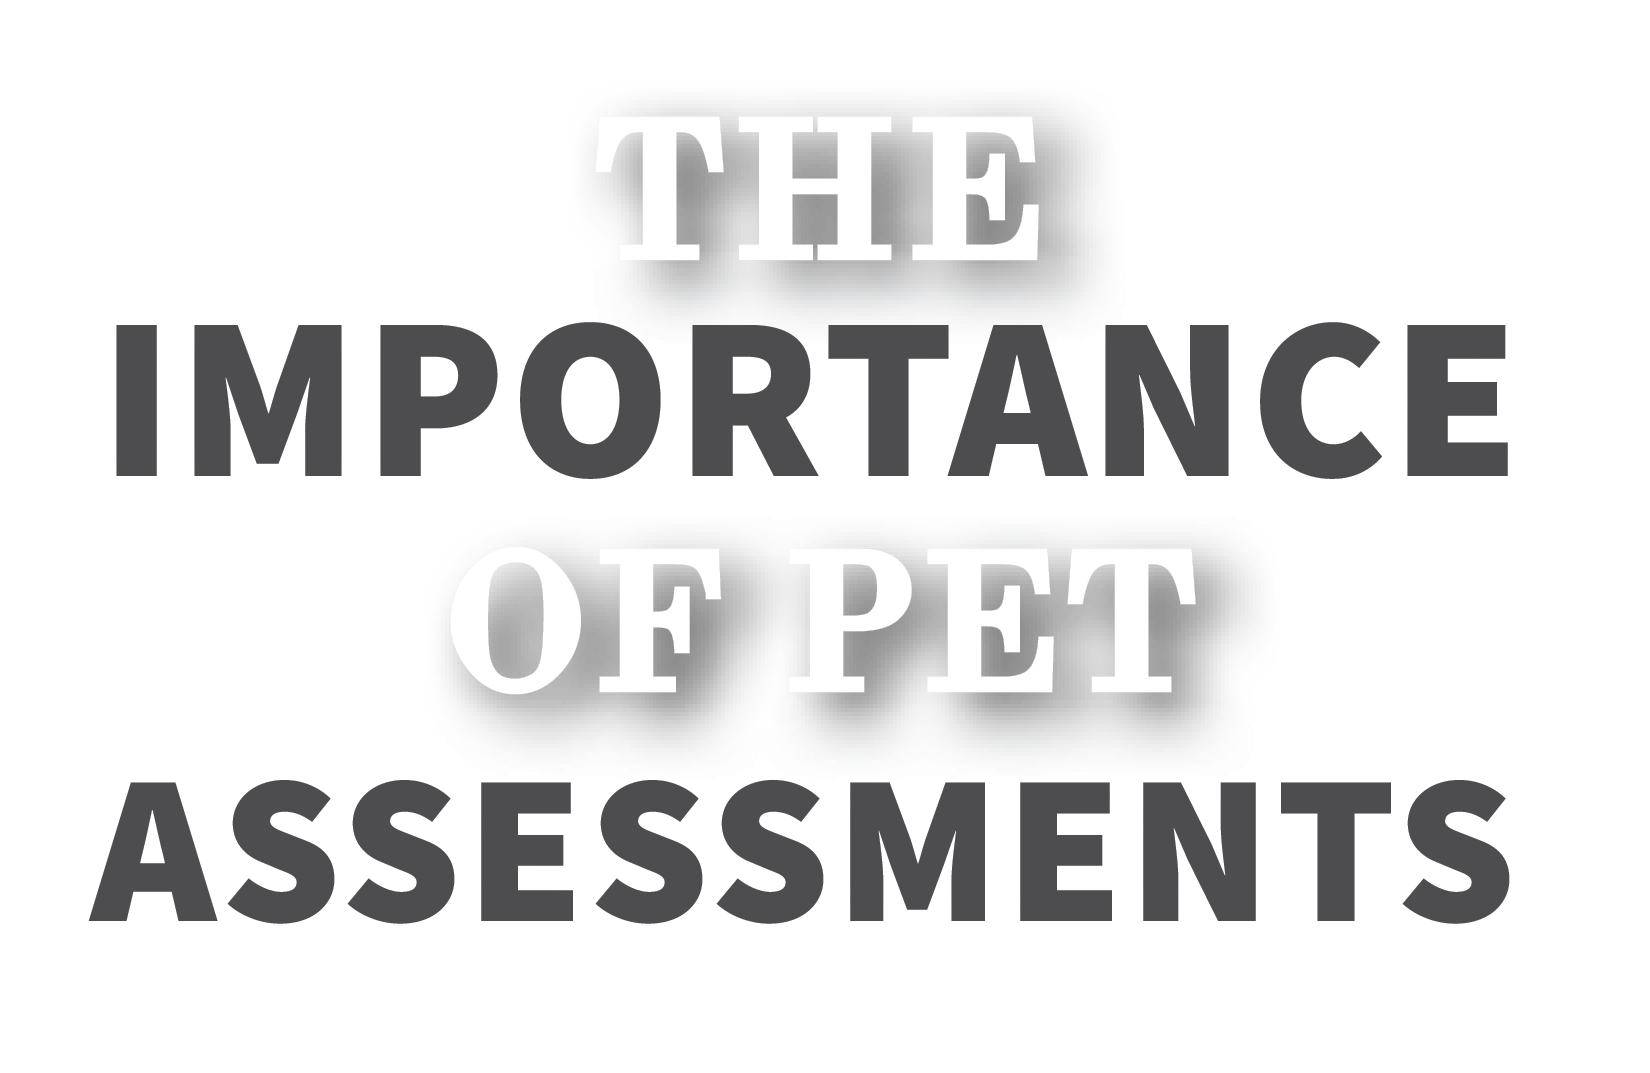 The Importance of Pet Assessments